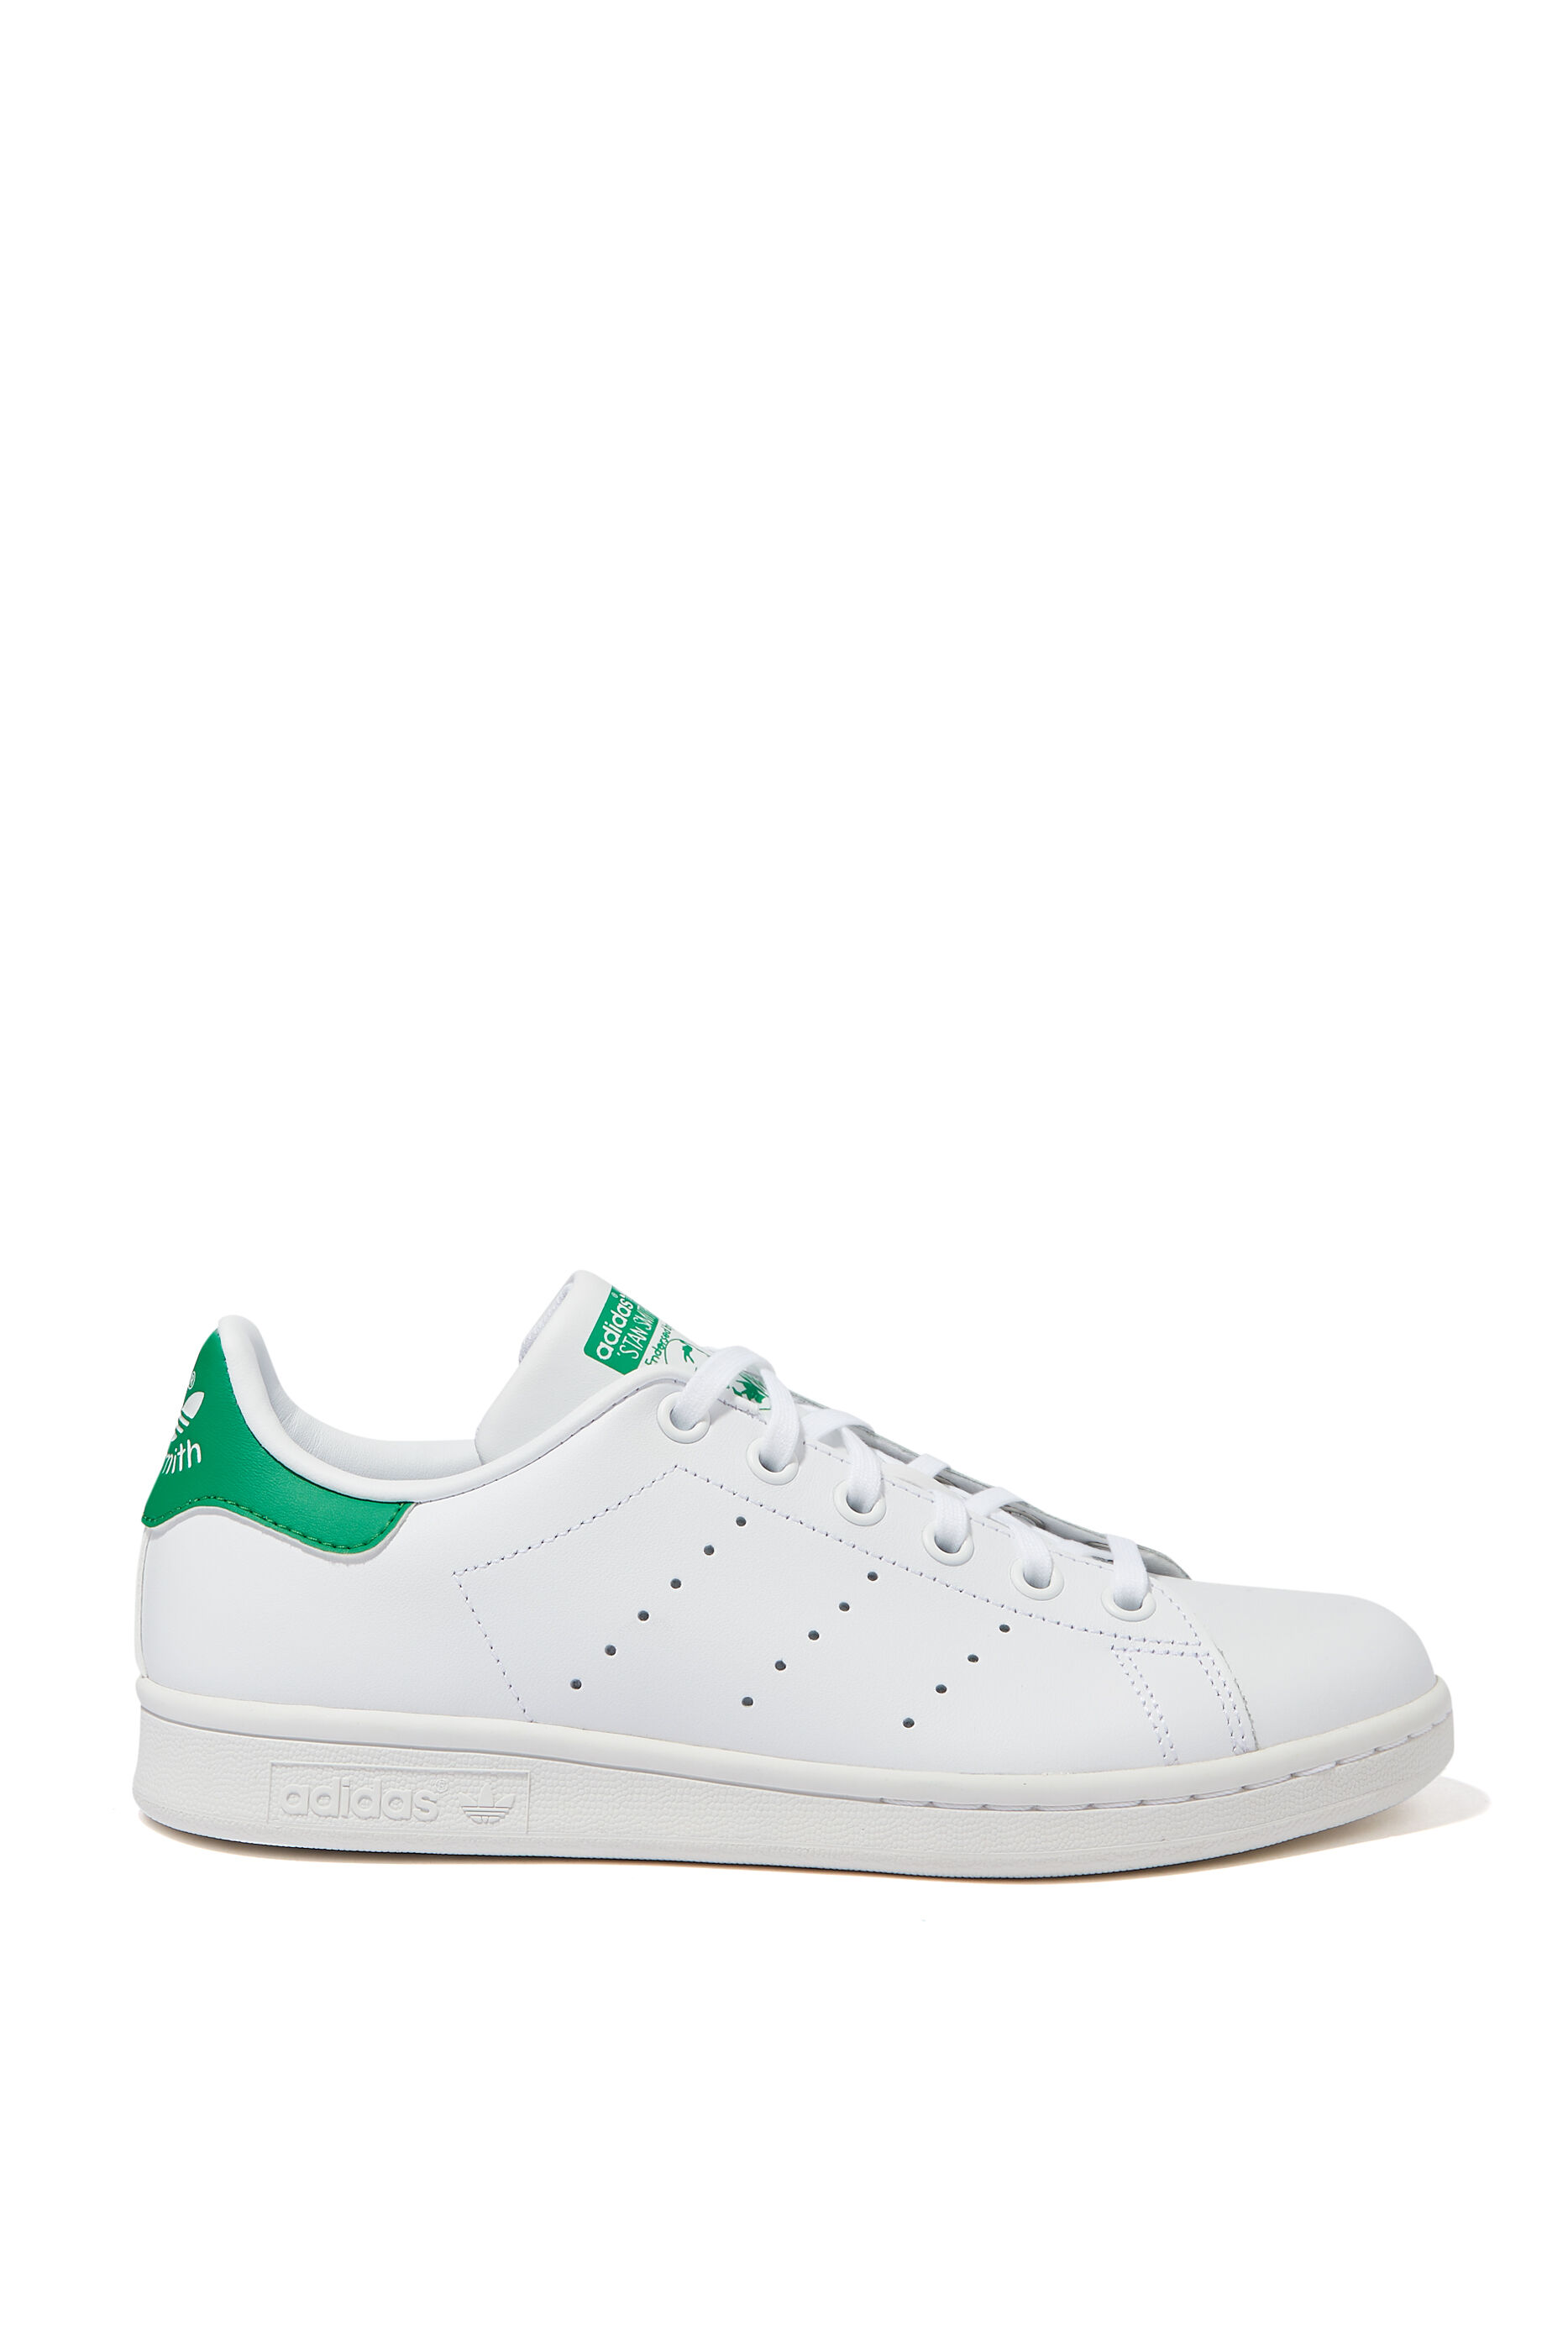 Buy Adidas Stan Smith Leather Sneakers 